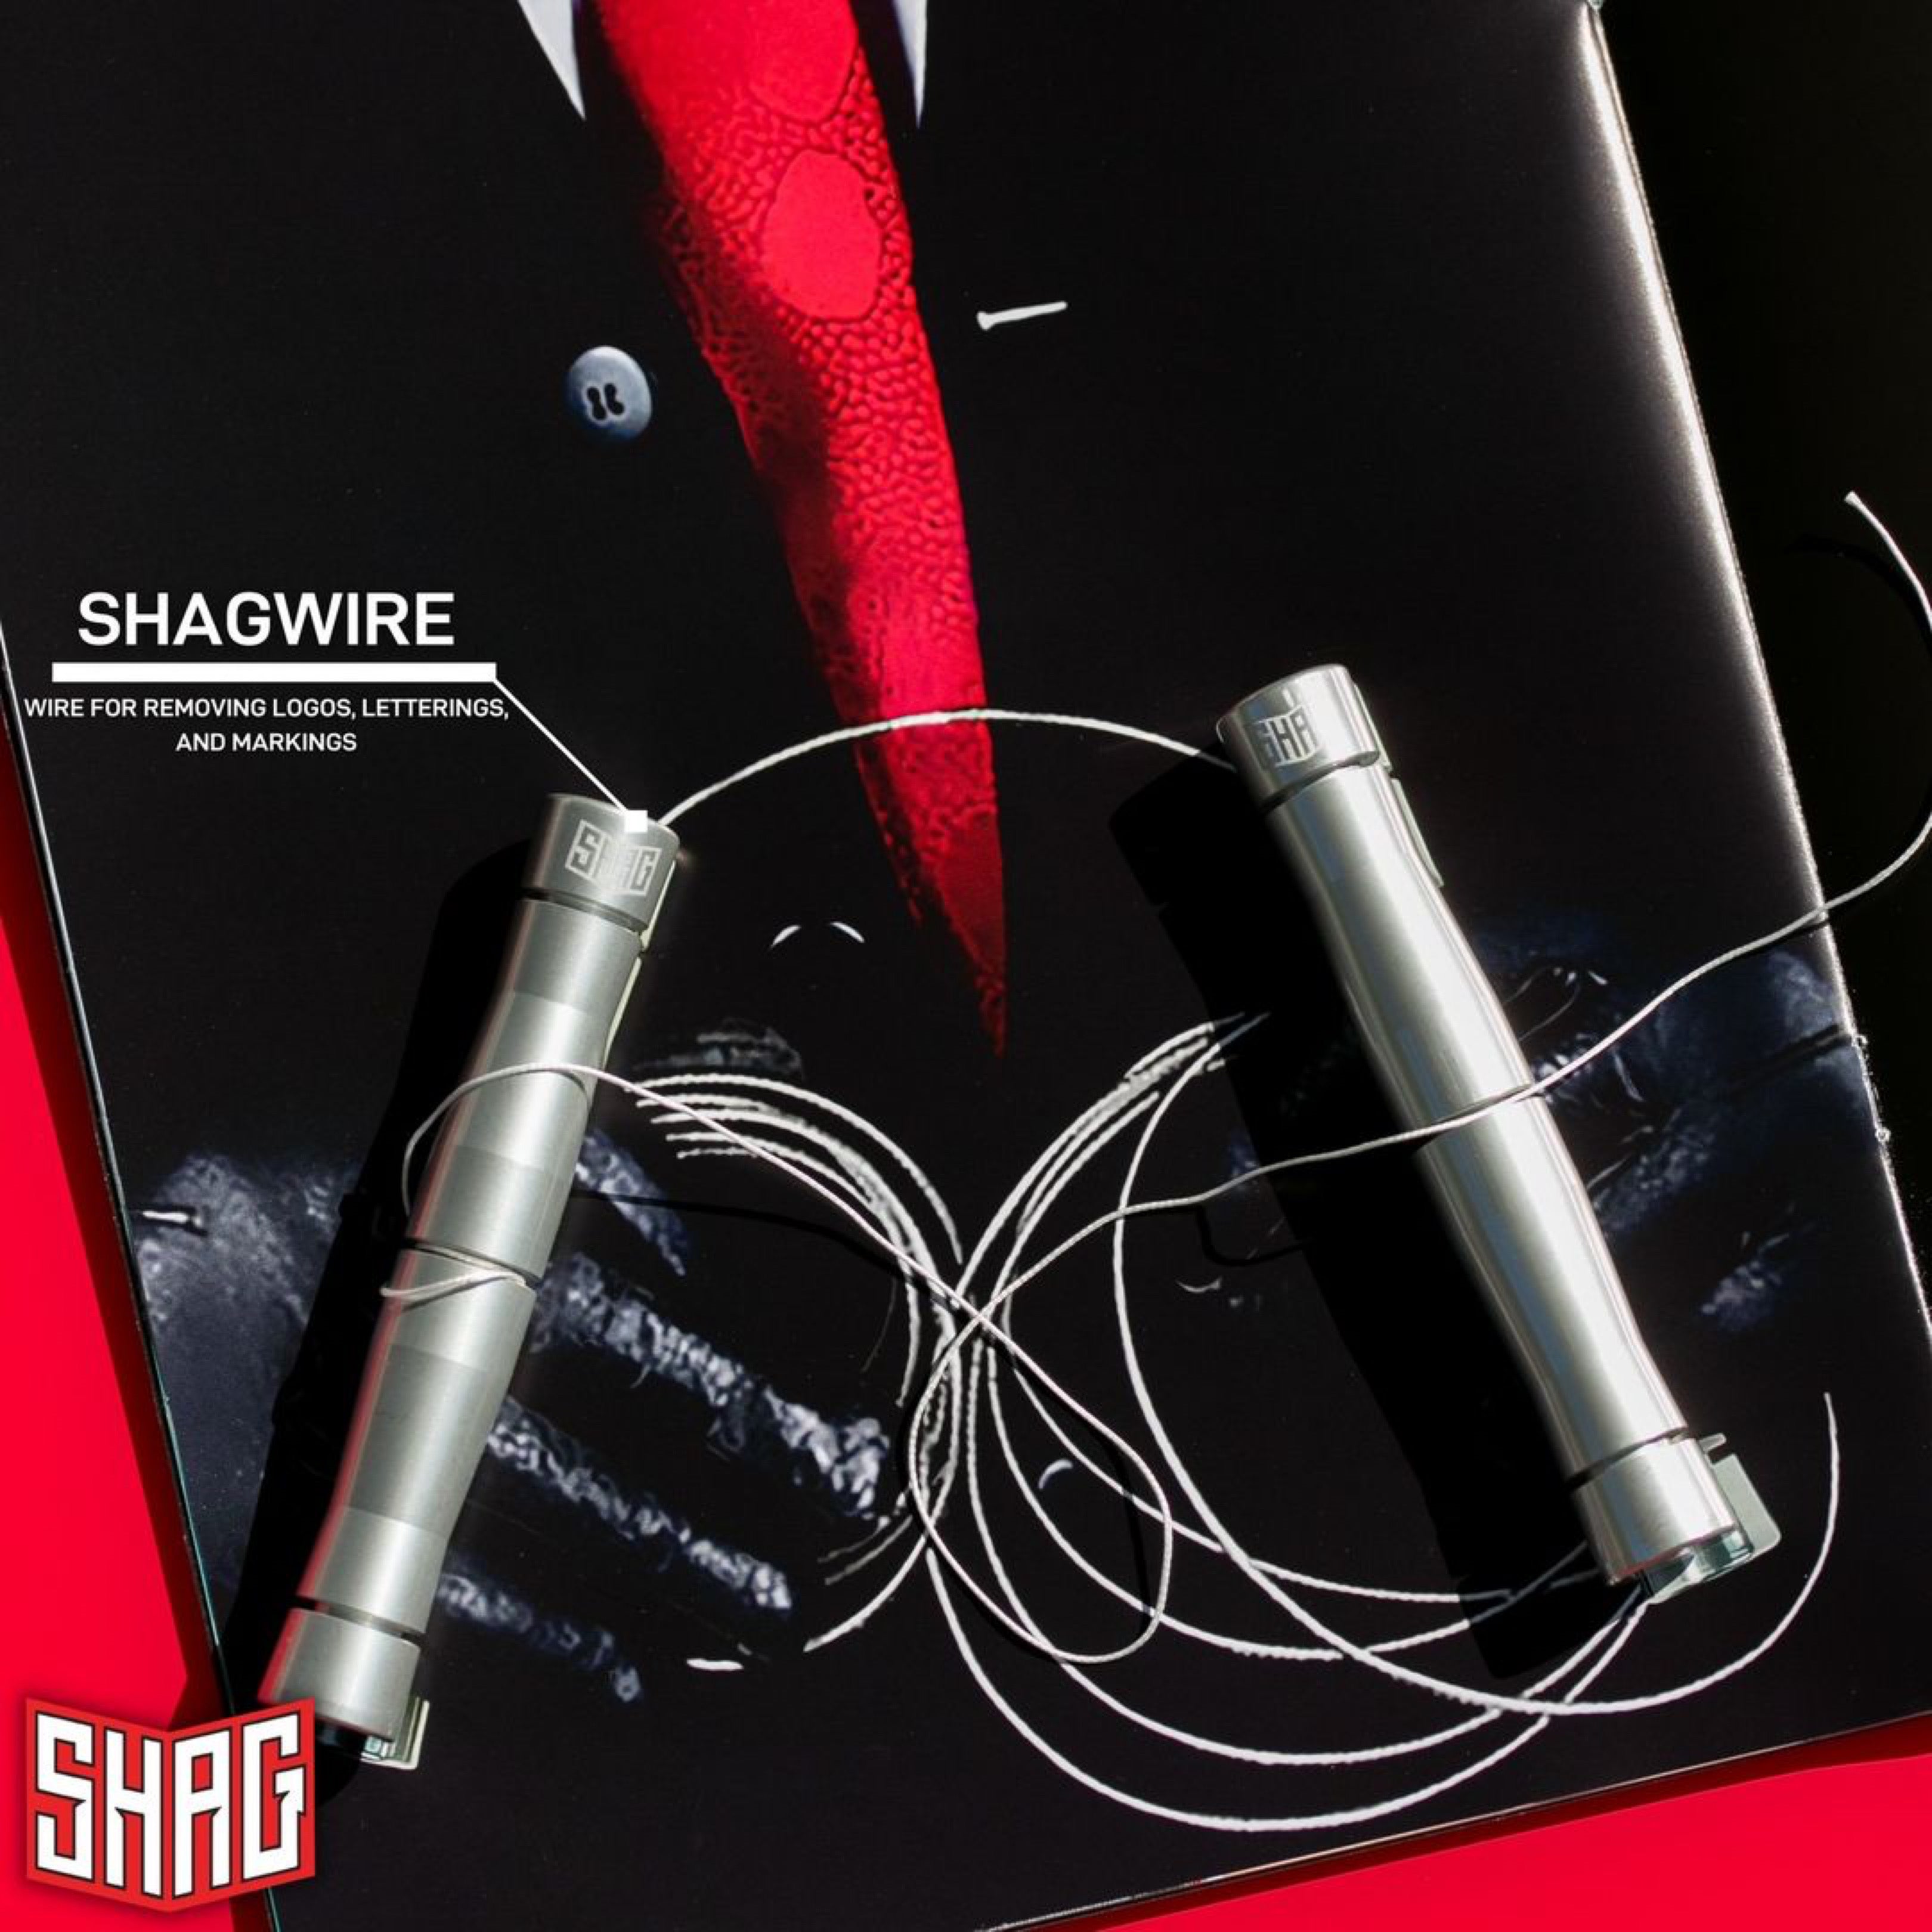 Hexis SHAGWIRE Cord for Emblem Removal